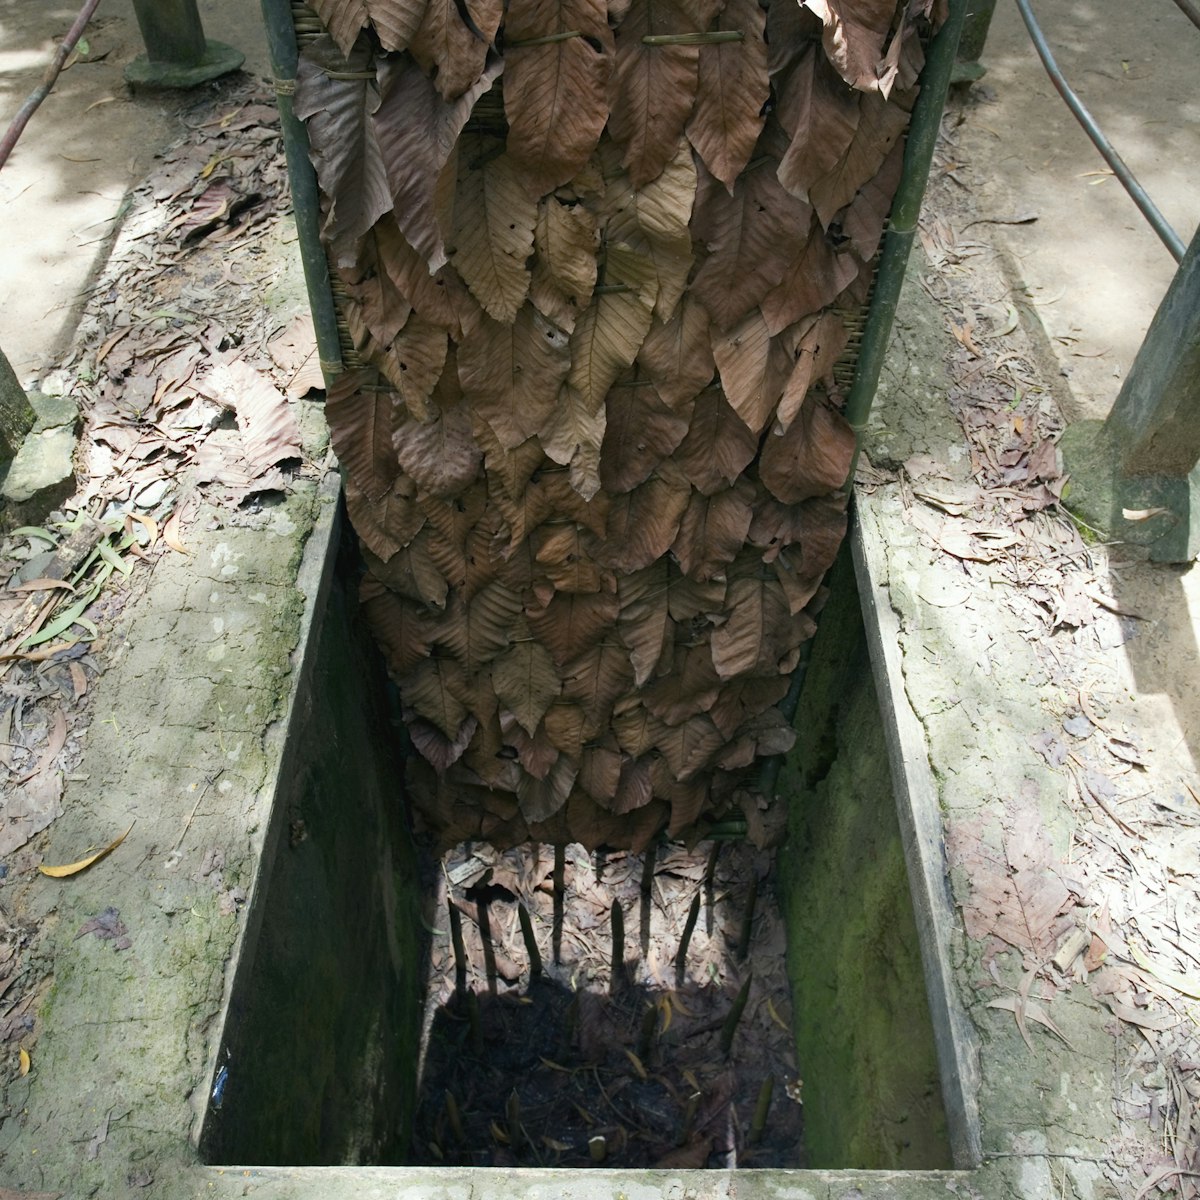 View of one of the leaf-covered traps used by Vietnamese soldiers during the Vietnam war, near HoChiMinh City, Vietnam